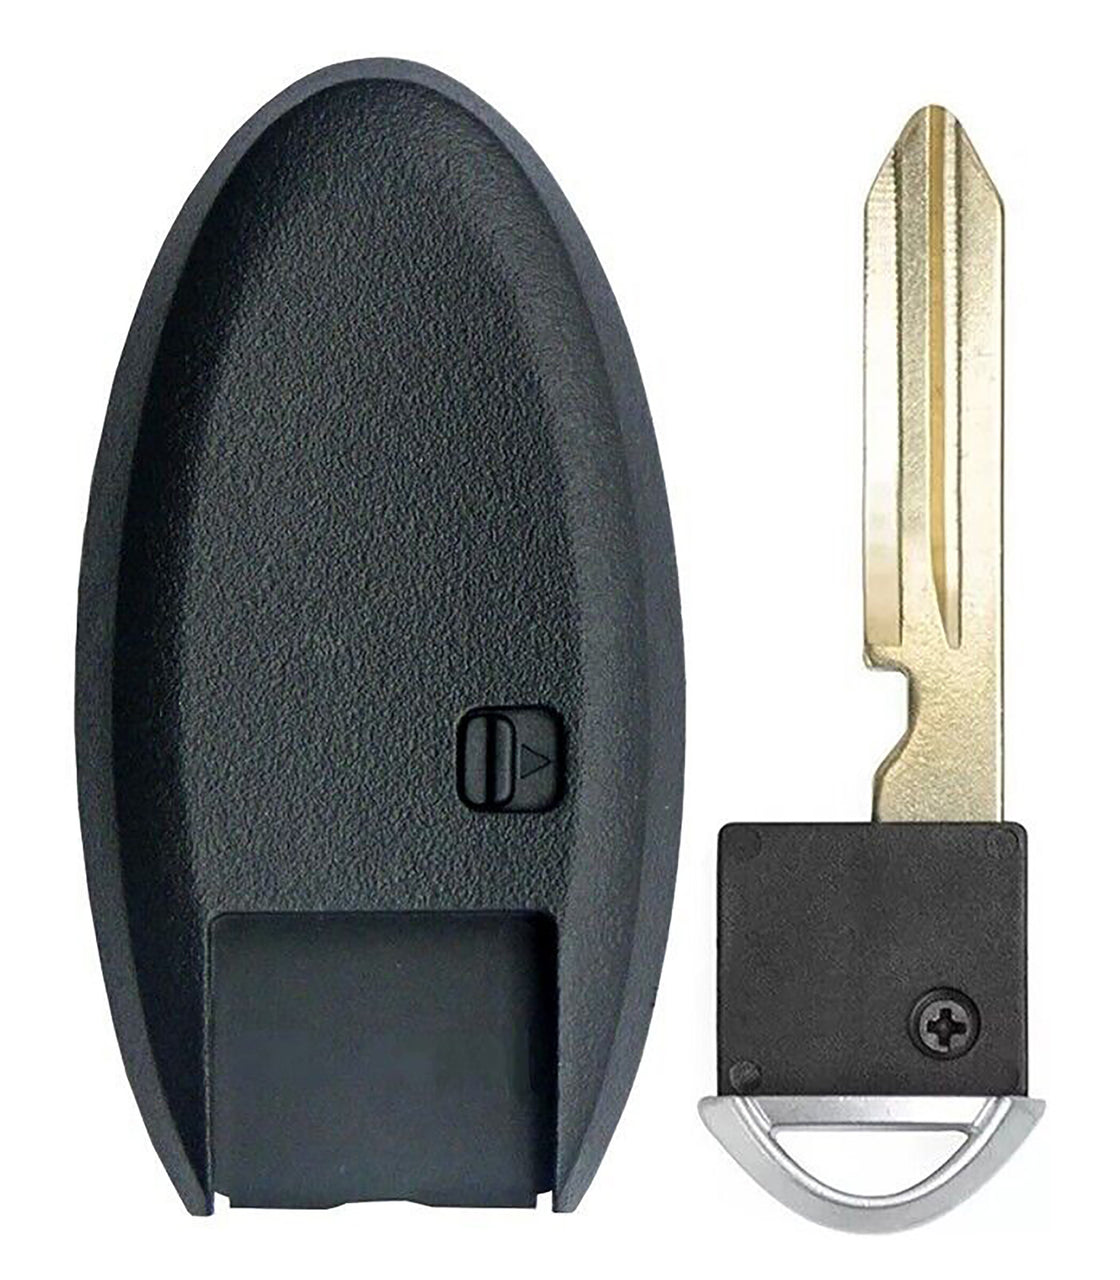 1x New Replacement Proximity Key Fob Compatible with & Fit For Nissan Vehicle. Read Description - MPN KR5TXN1-04